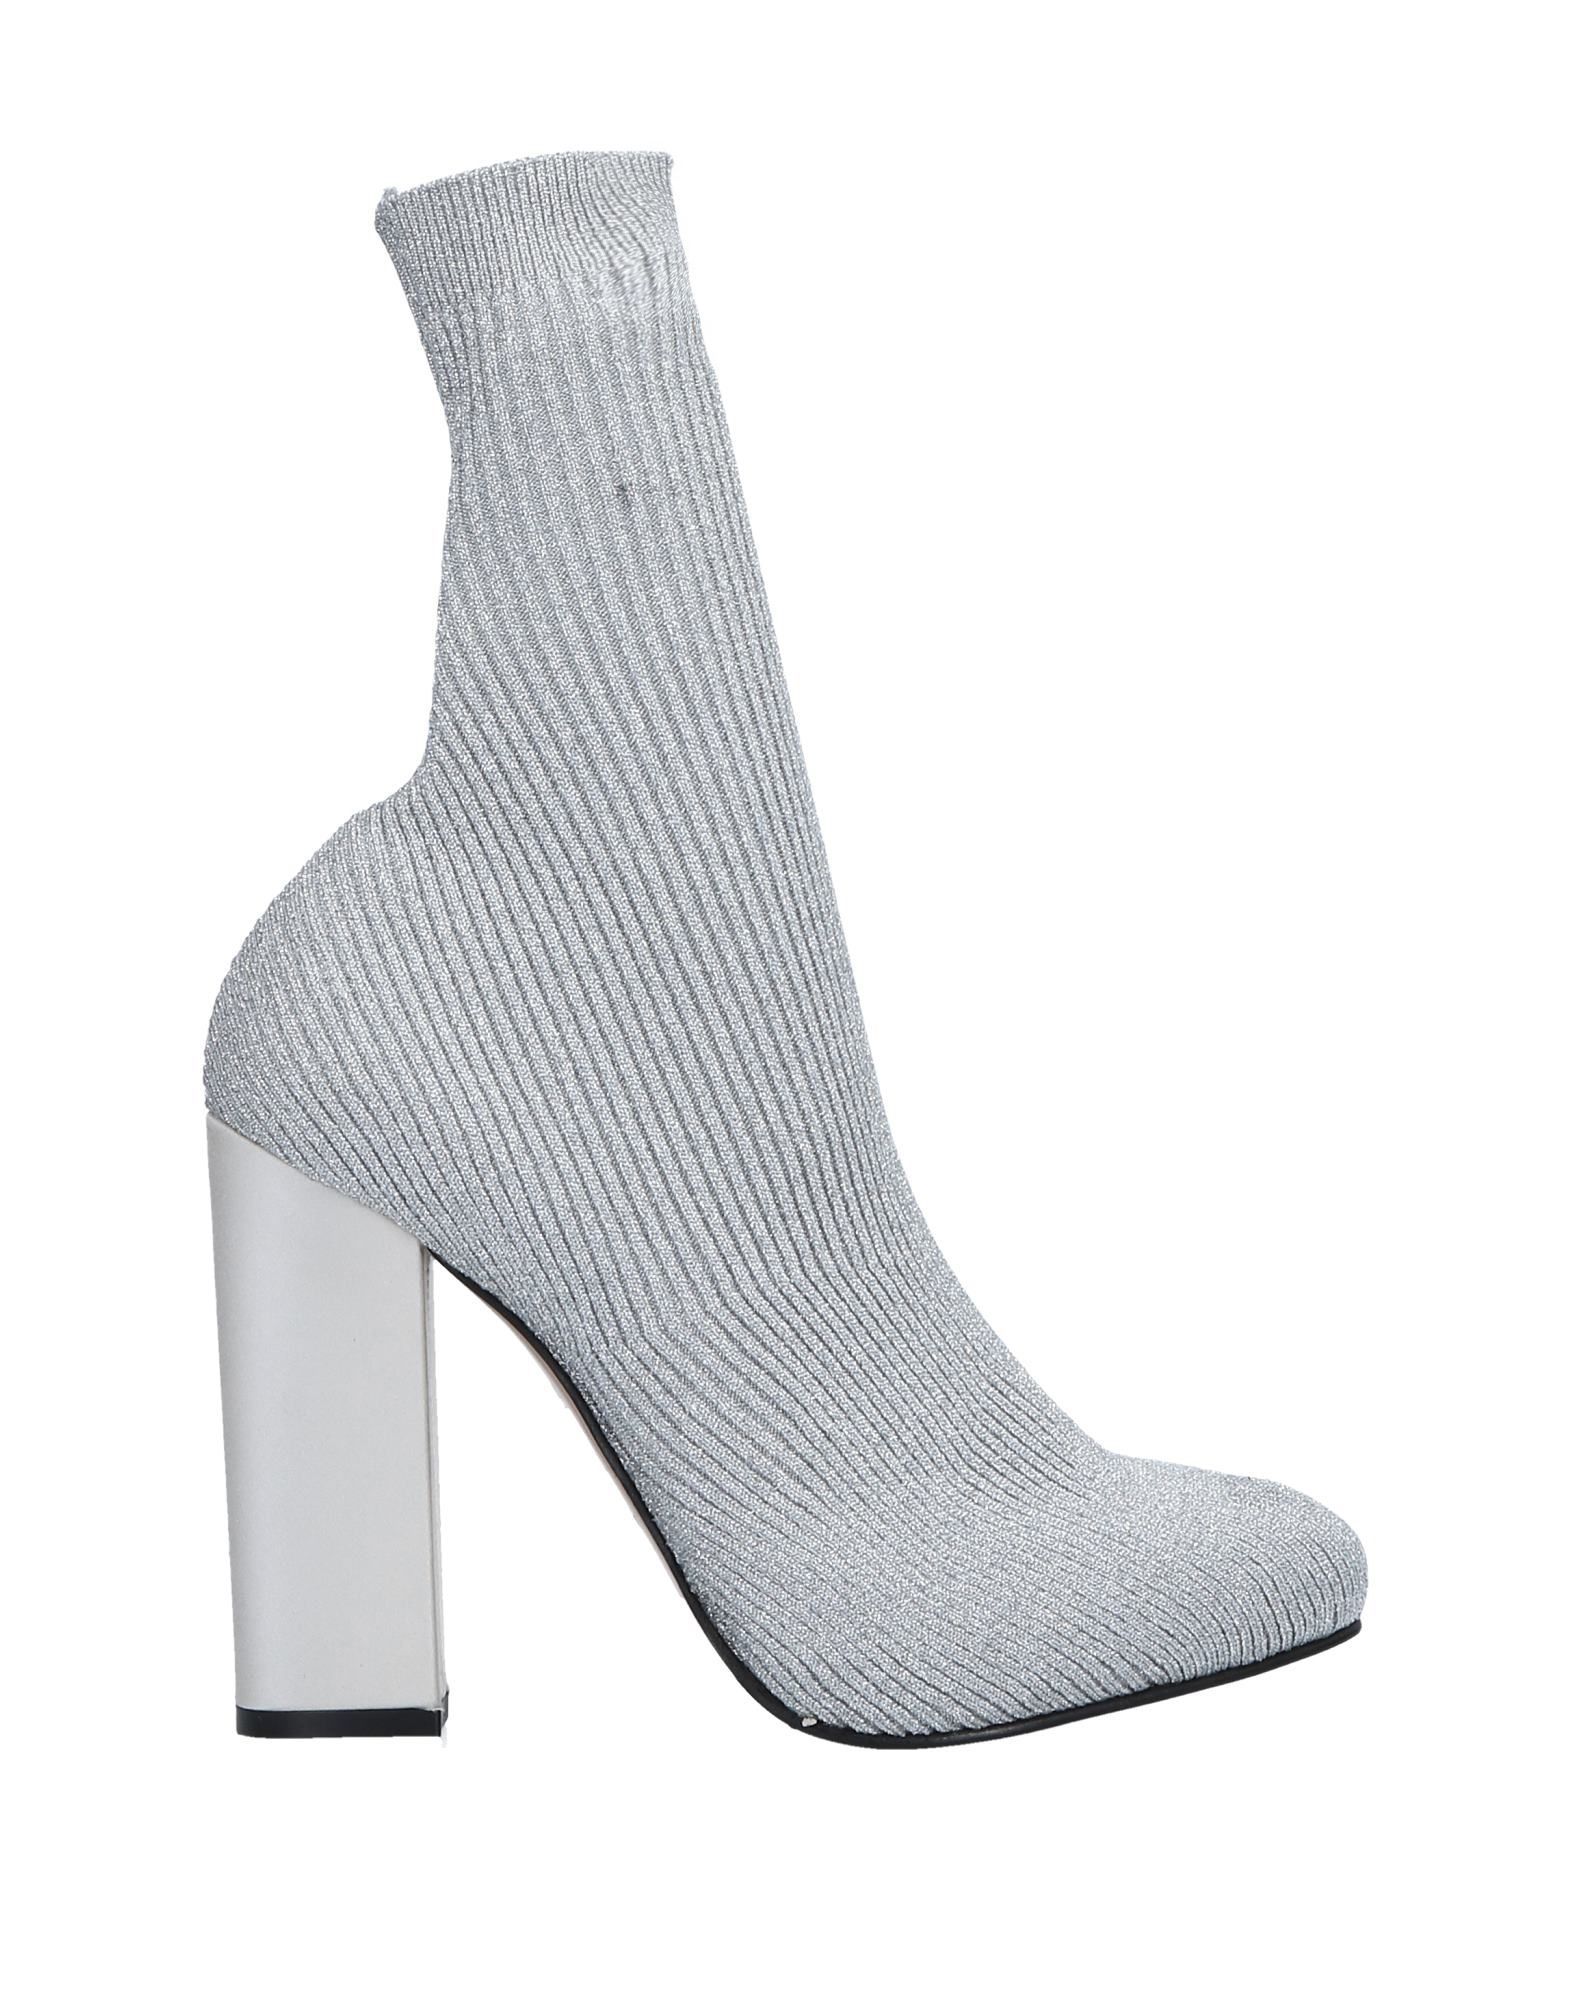 knitted, lamé, no appliqués, solid colour, round toeline, square heel, covered heel, fully lined, leather/rubber sole, contains non-textile parts of animal origin